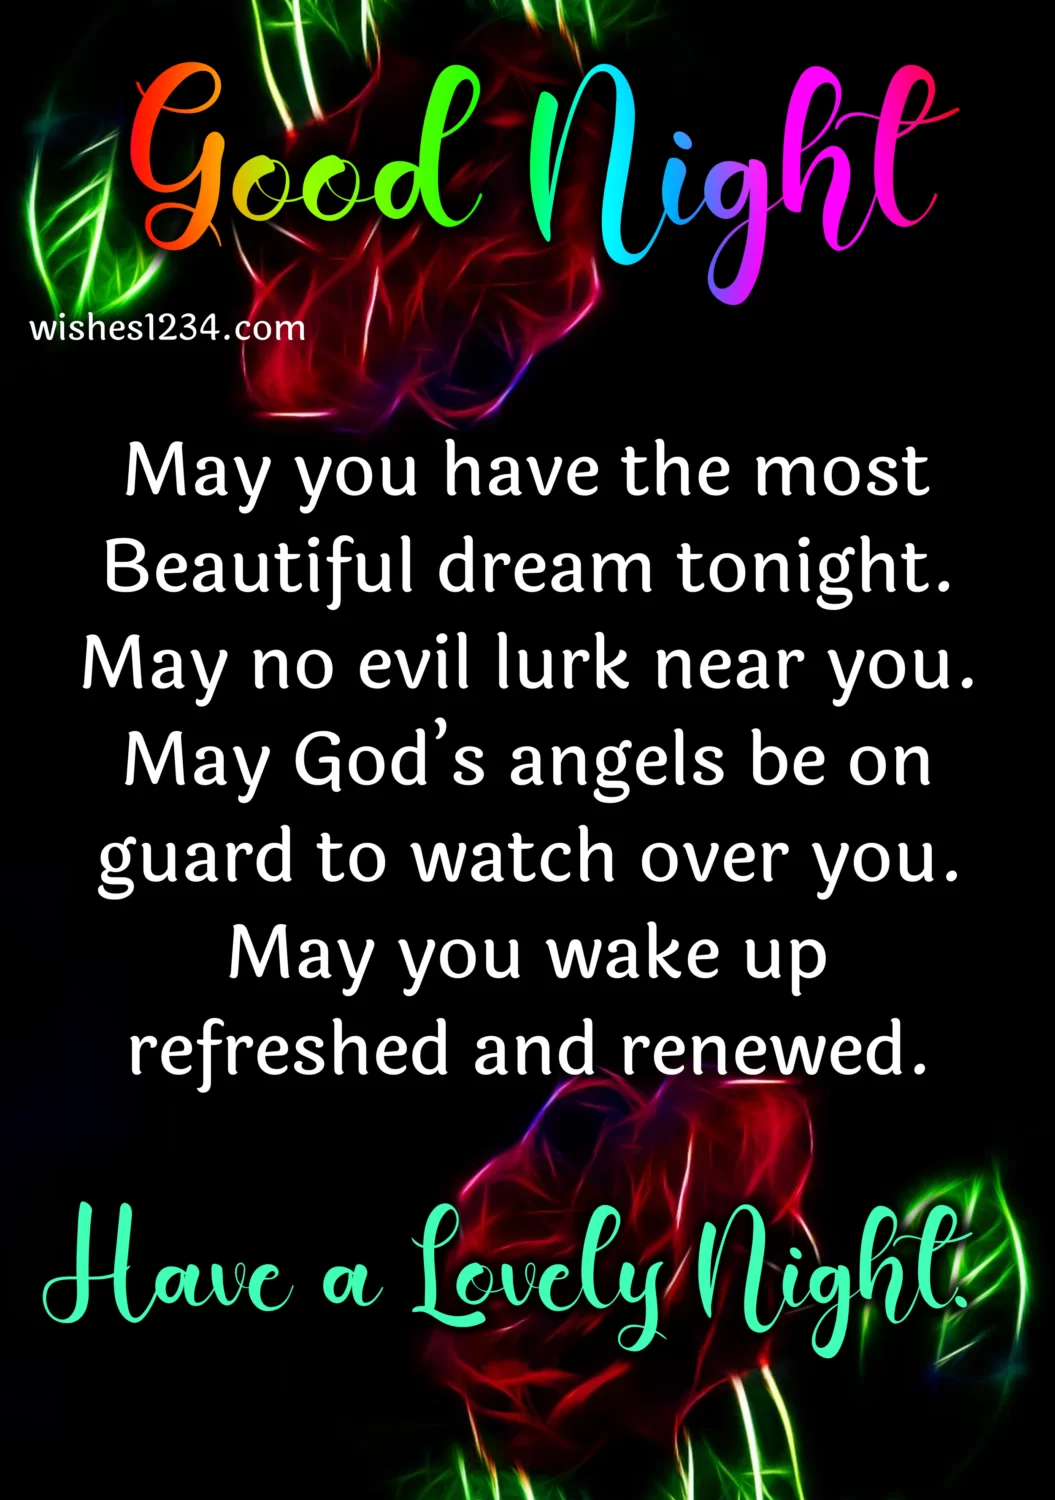 Good night blessings with red roses neon, Good Night Prayer Message.